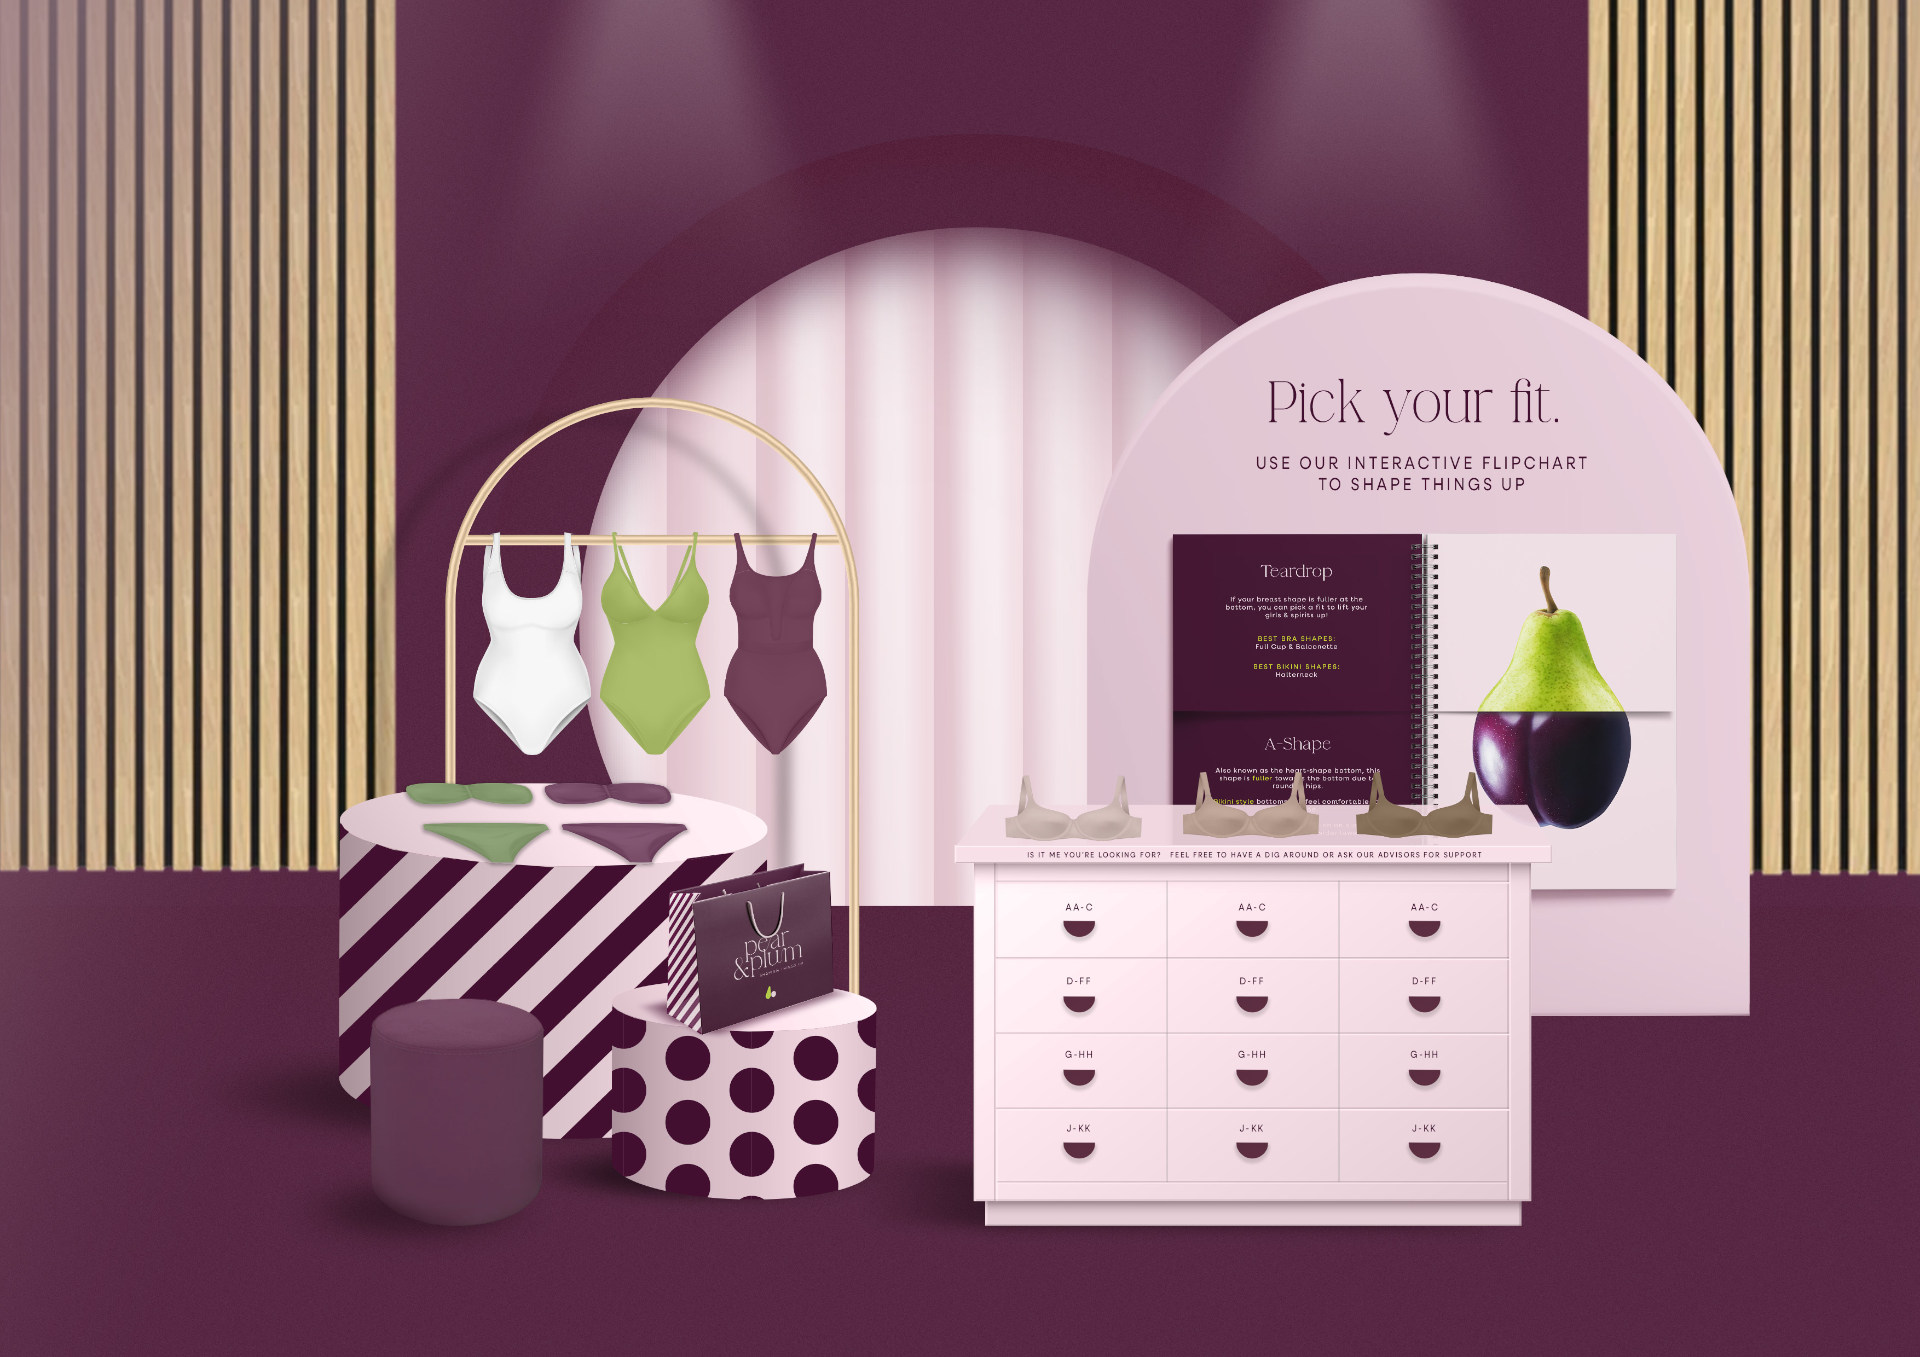 Design of store front with chest of drawers, boxes and clothing from Pear & Plum brand